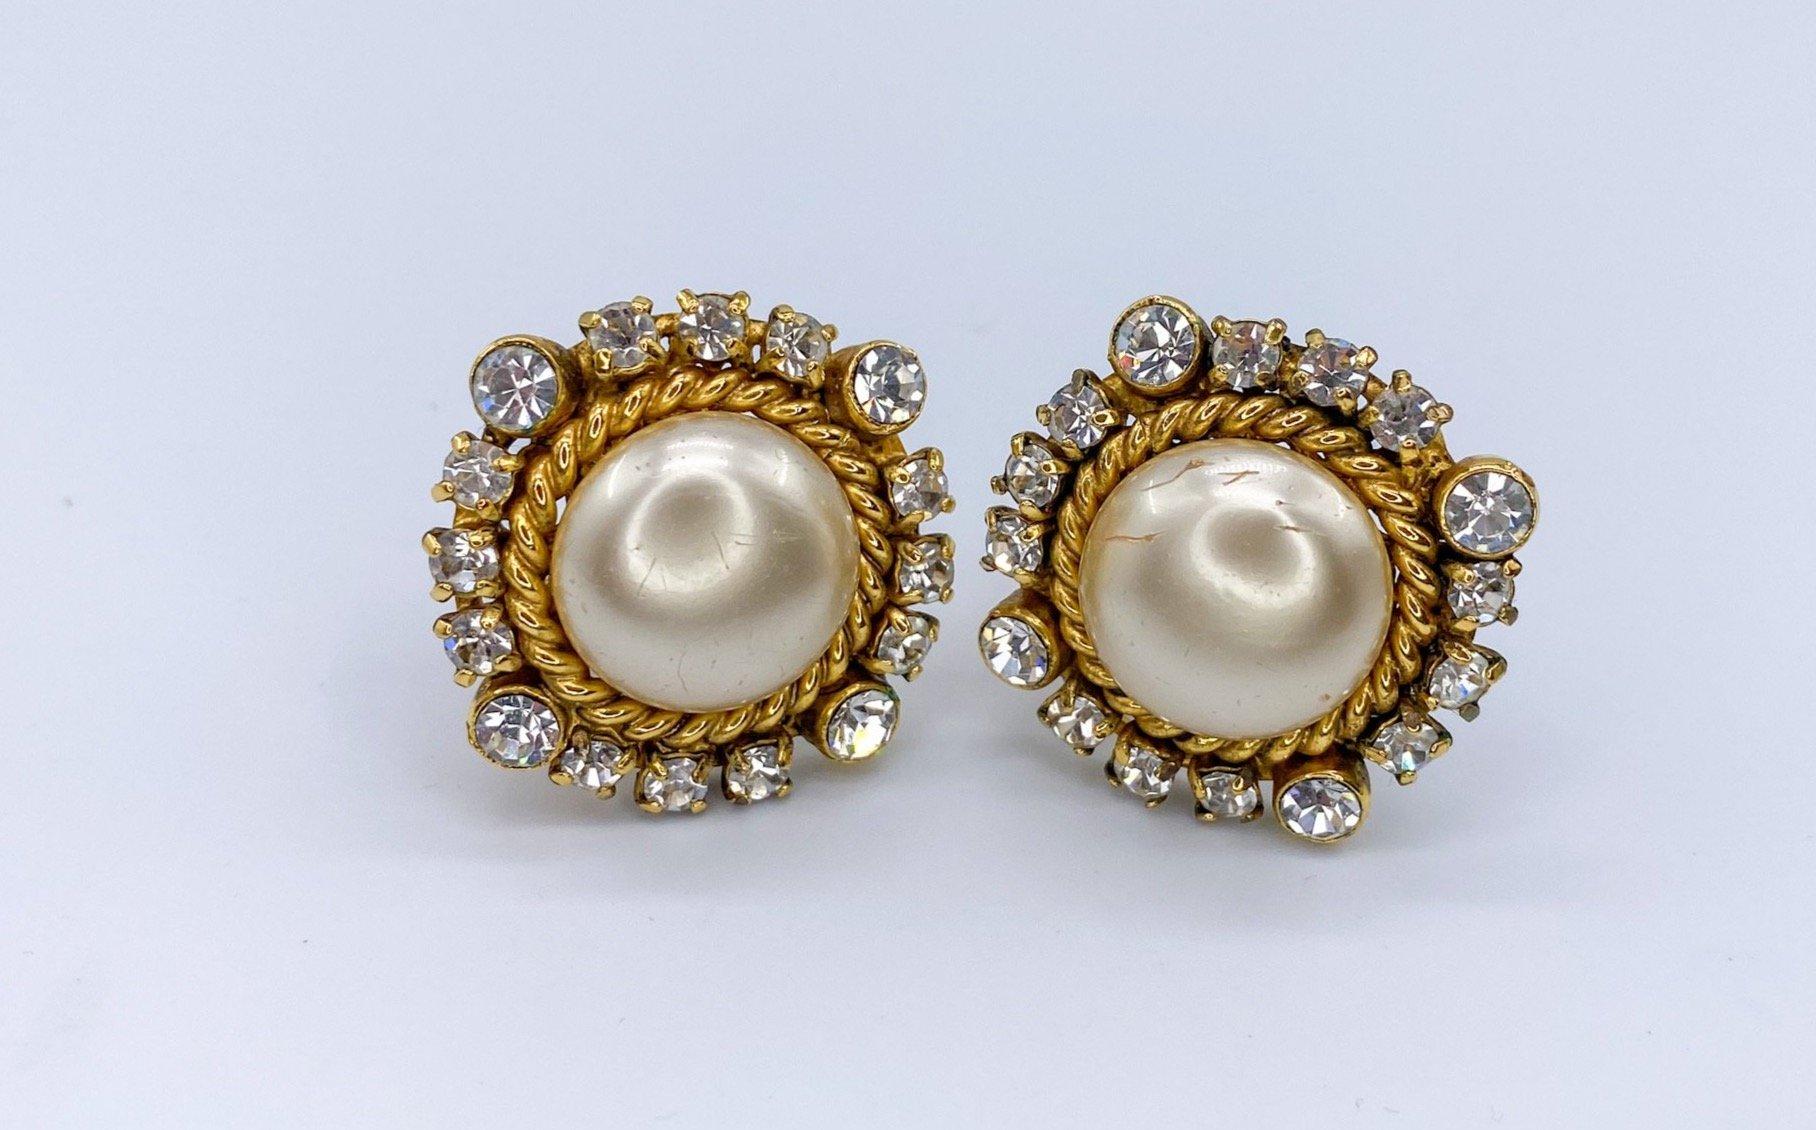 Chanel Vintage 1980s Clip On Earrings. 

Cast from gold plated metal, featuring beautiful baroque faux pearls surrounded by sparkling rhinestones. These are true showstoppers for women with confidence. 80s Chanel is all about bold and gold statement